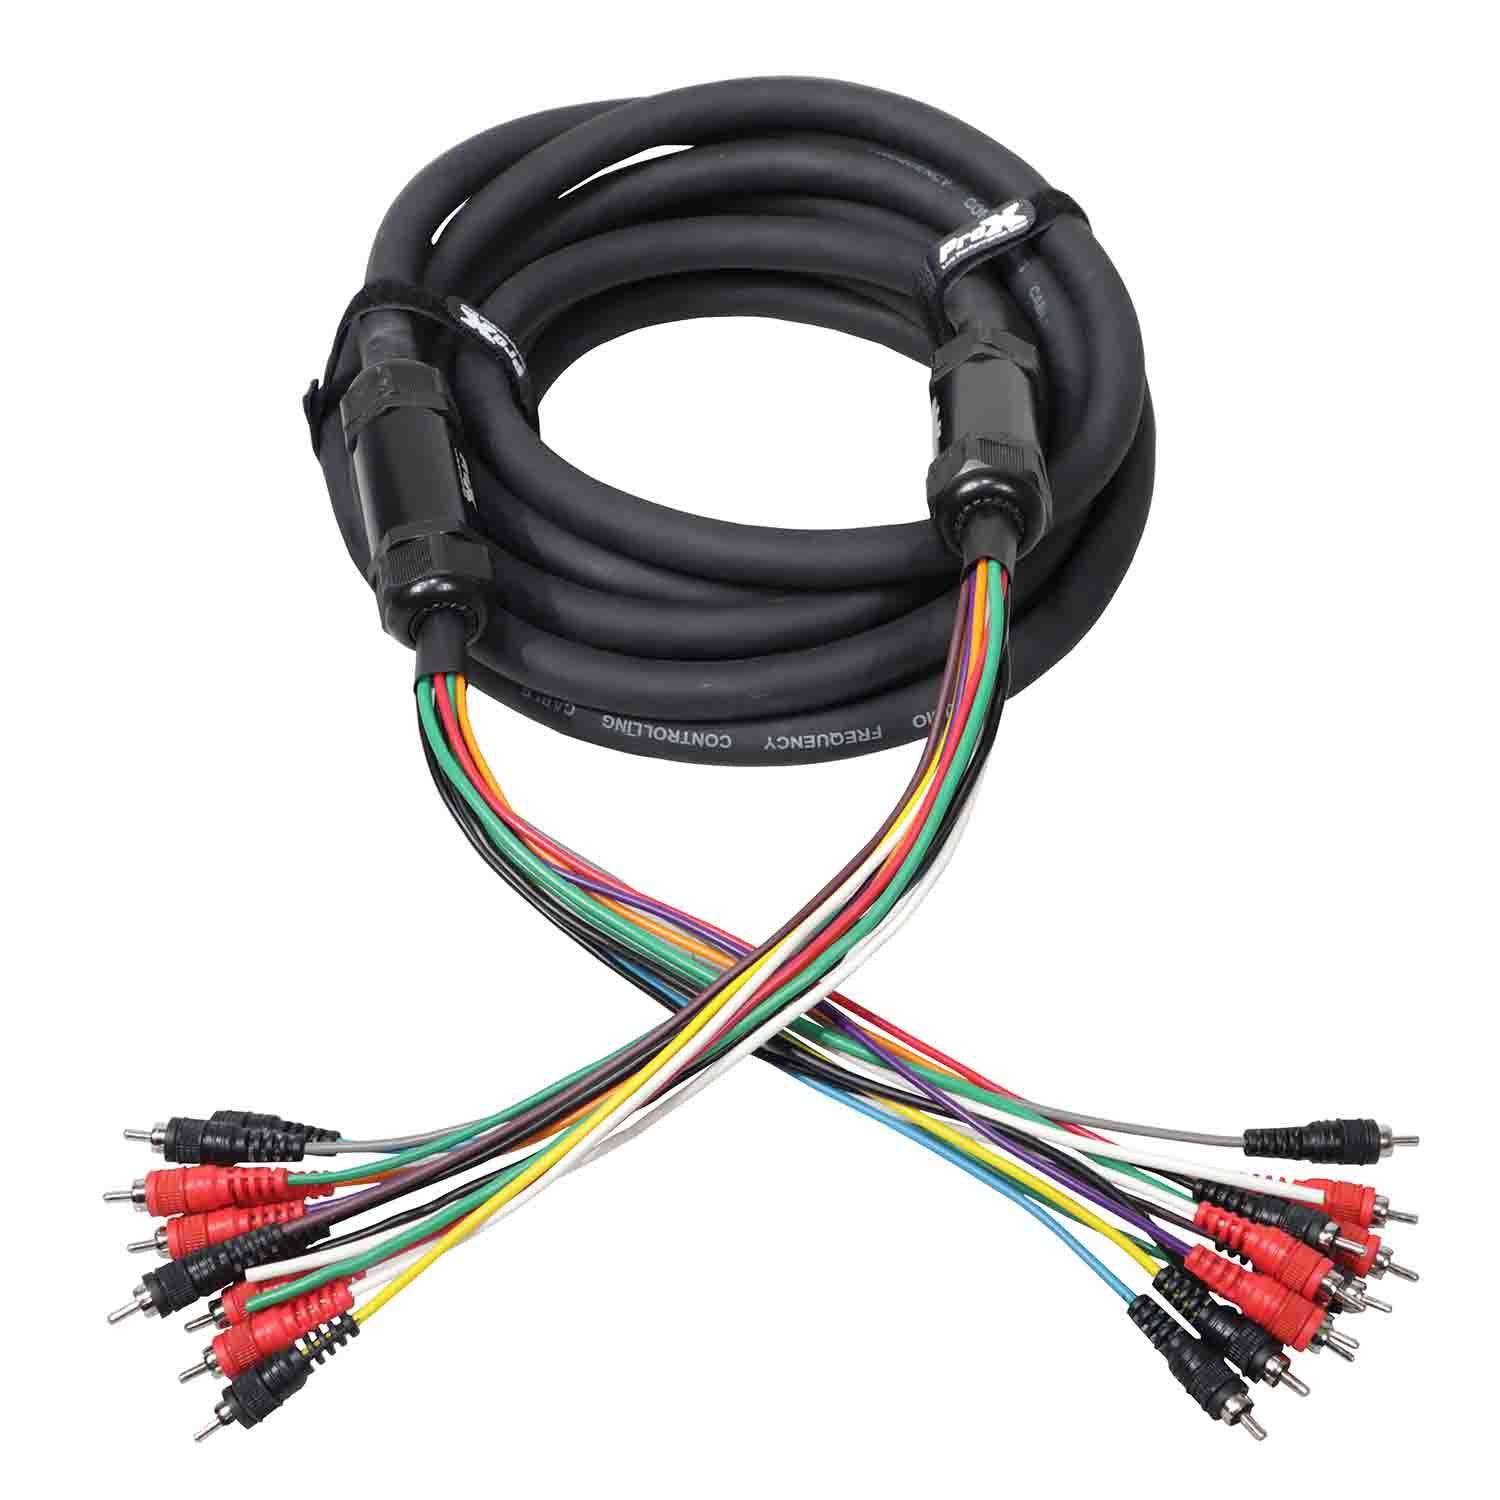 ProX XC-MEDOOZA25, 10 RCA Channel + 3 Power Cable for Marine and Car Audio - 25 Feet - Hollywood DJ